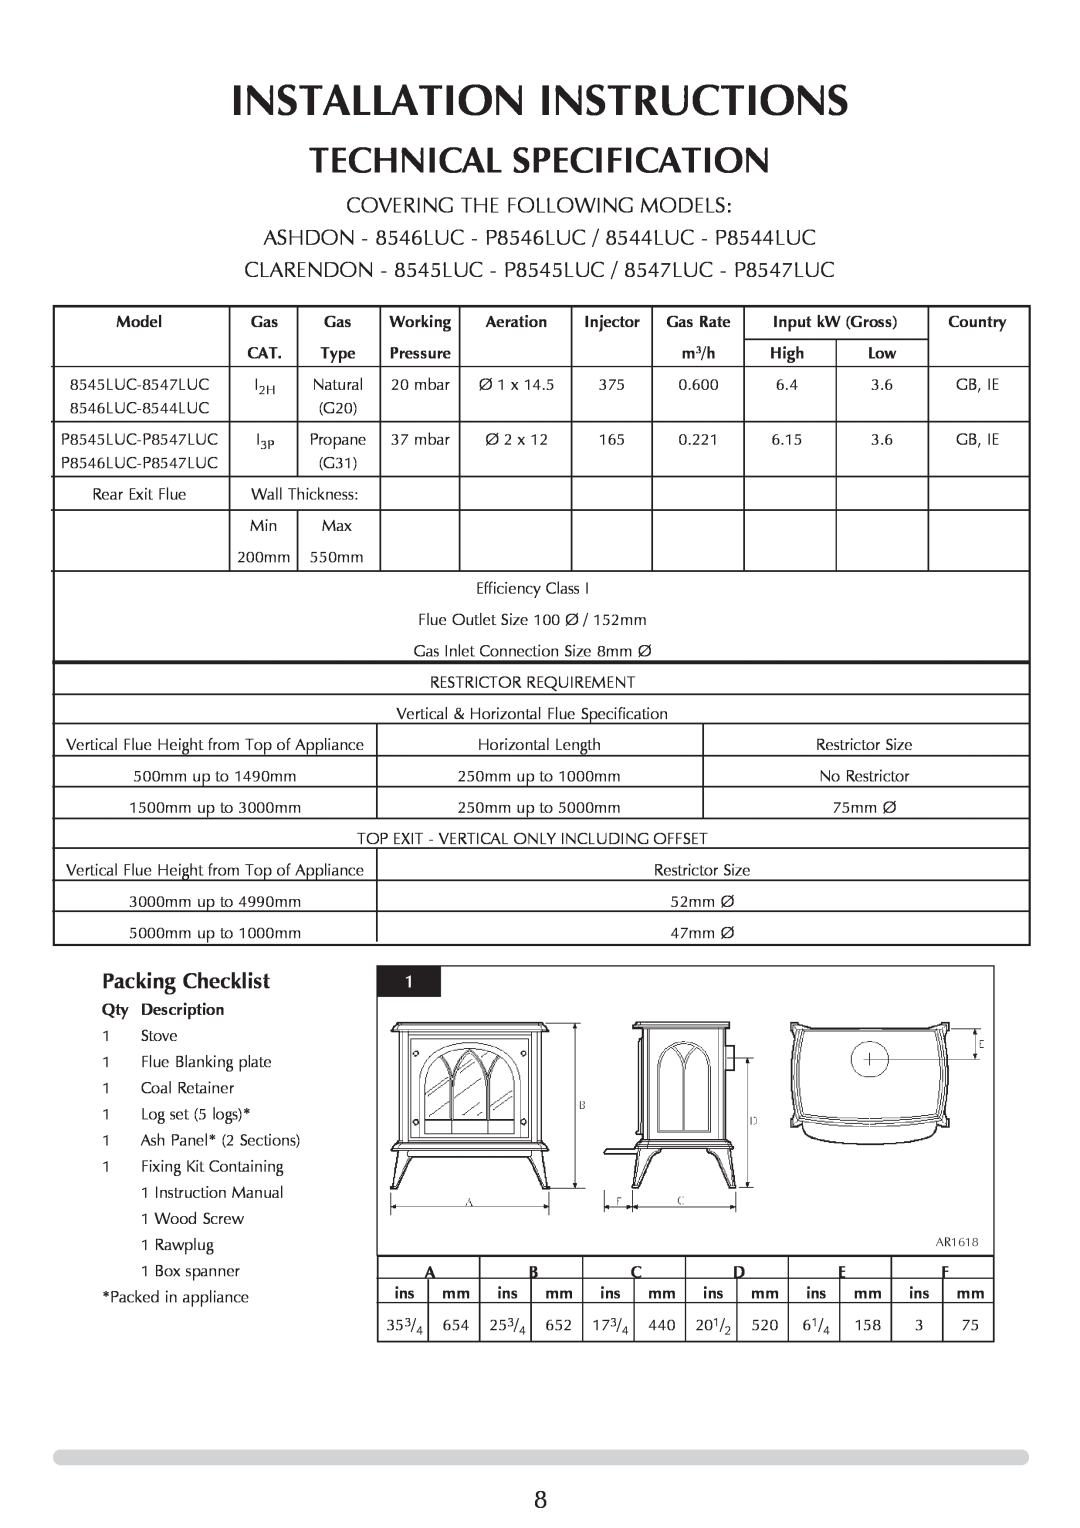 Stovax ASHDON 8546LUC-P8546LUC manual Installation Instructions, Technical Specification, Covering The Following Models 